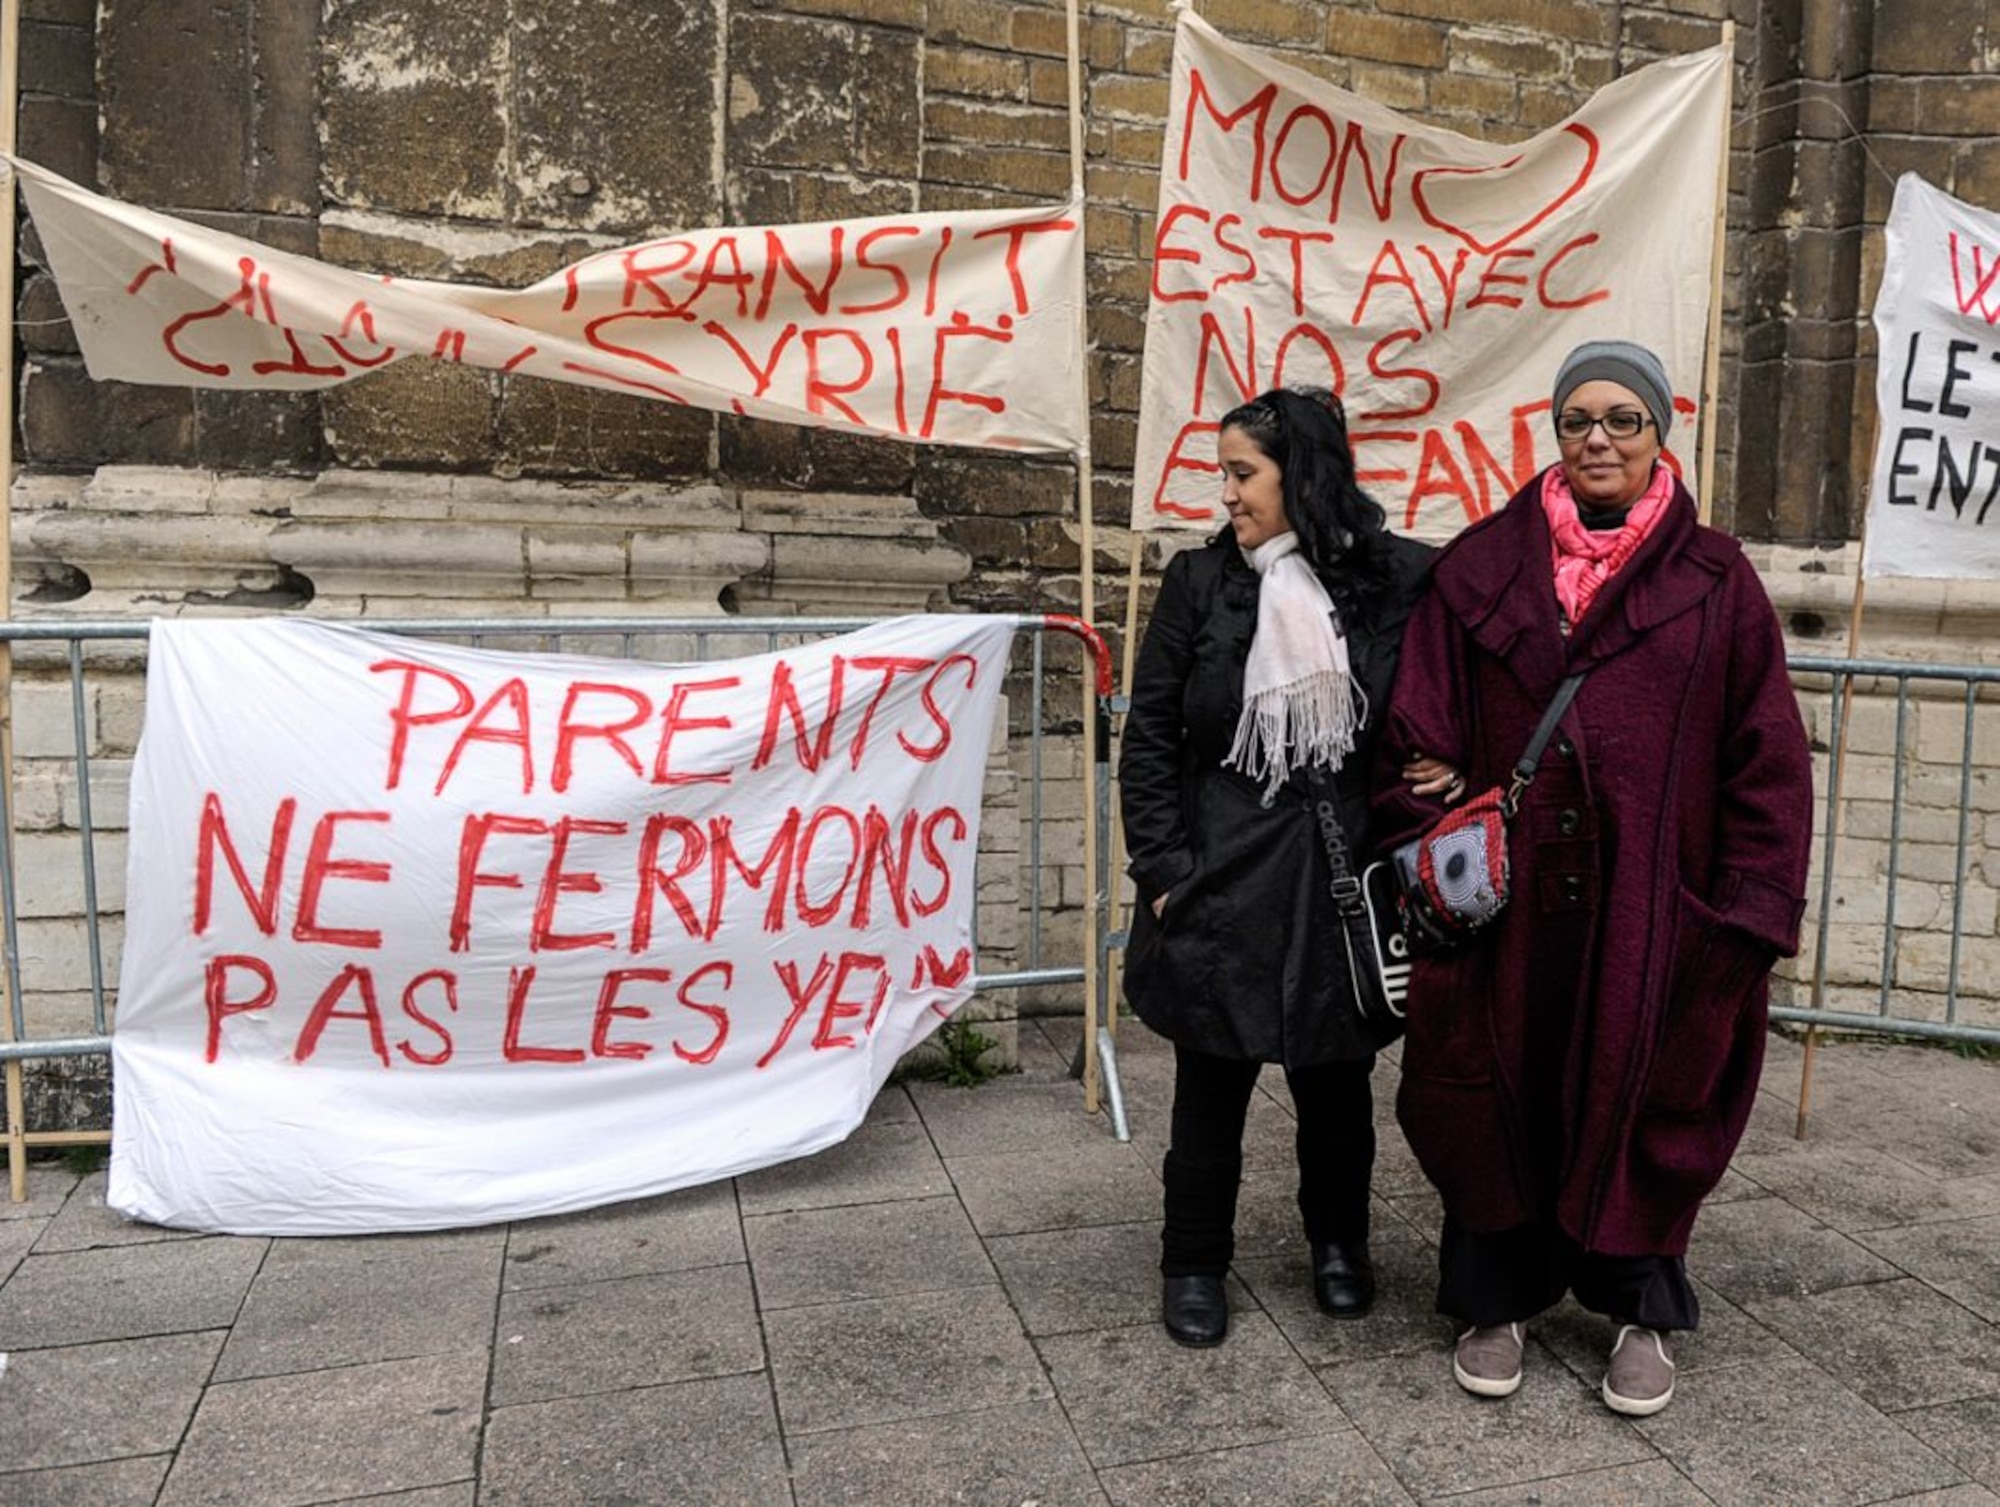 Saliha Ben Ali (right) joins another mother to protest against Belgian youths fighting in Syria. The lower left banner reads: "Parents: let us not close our eyes." (© Laurent Dubrule /Reuters)